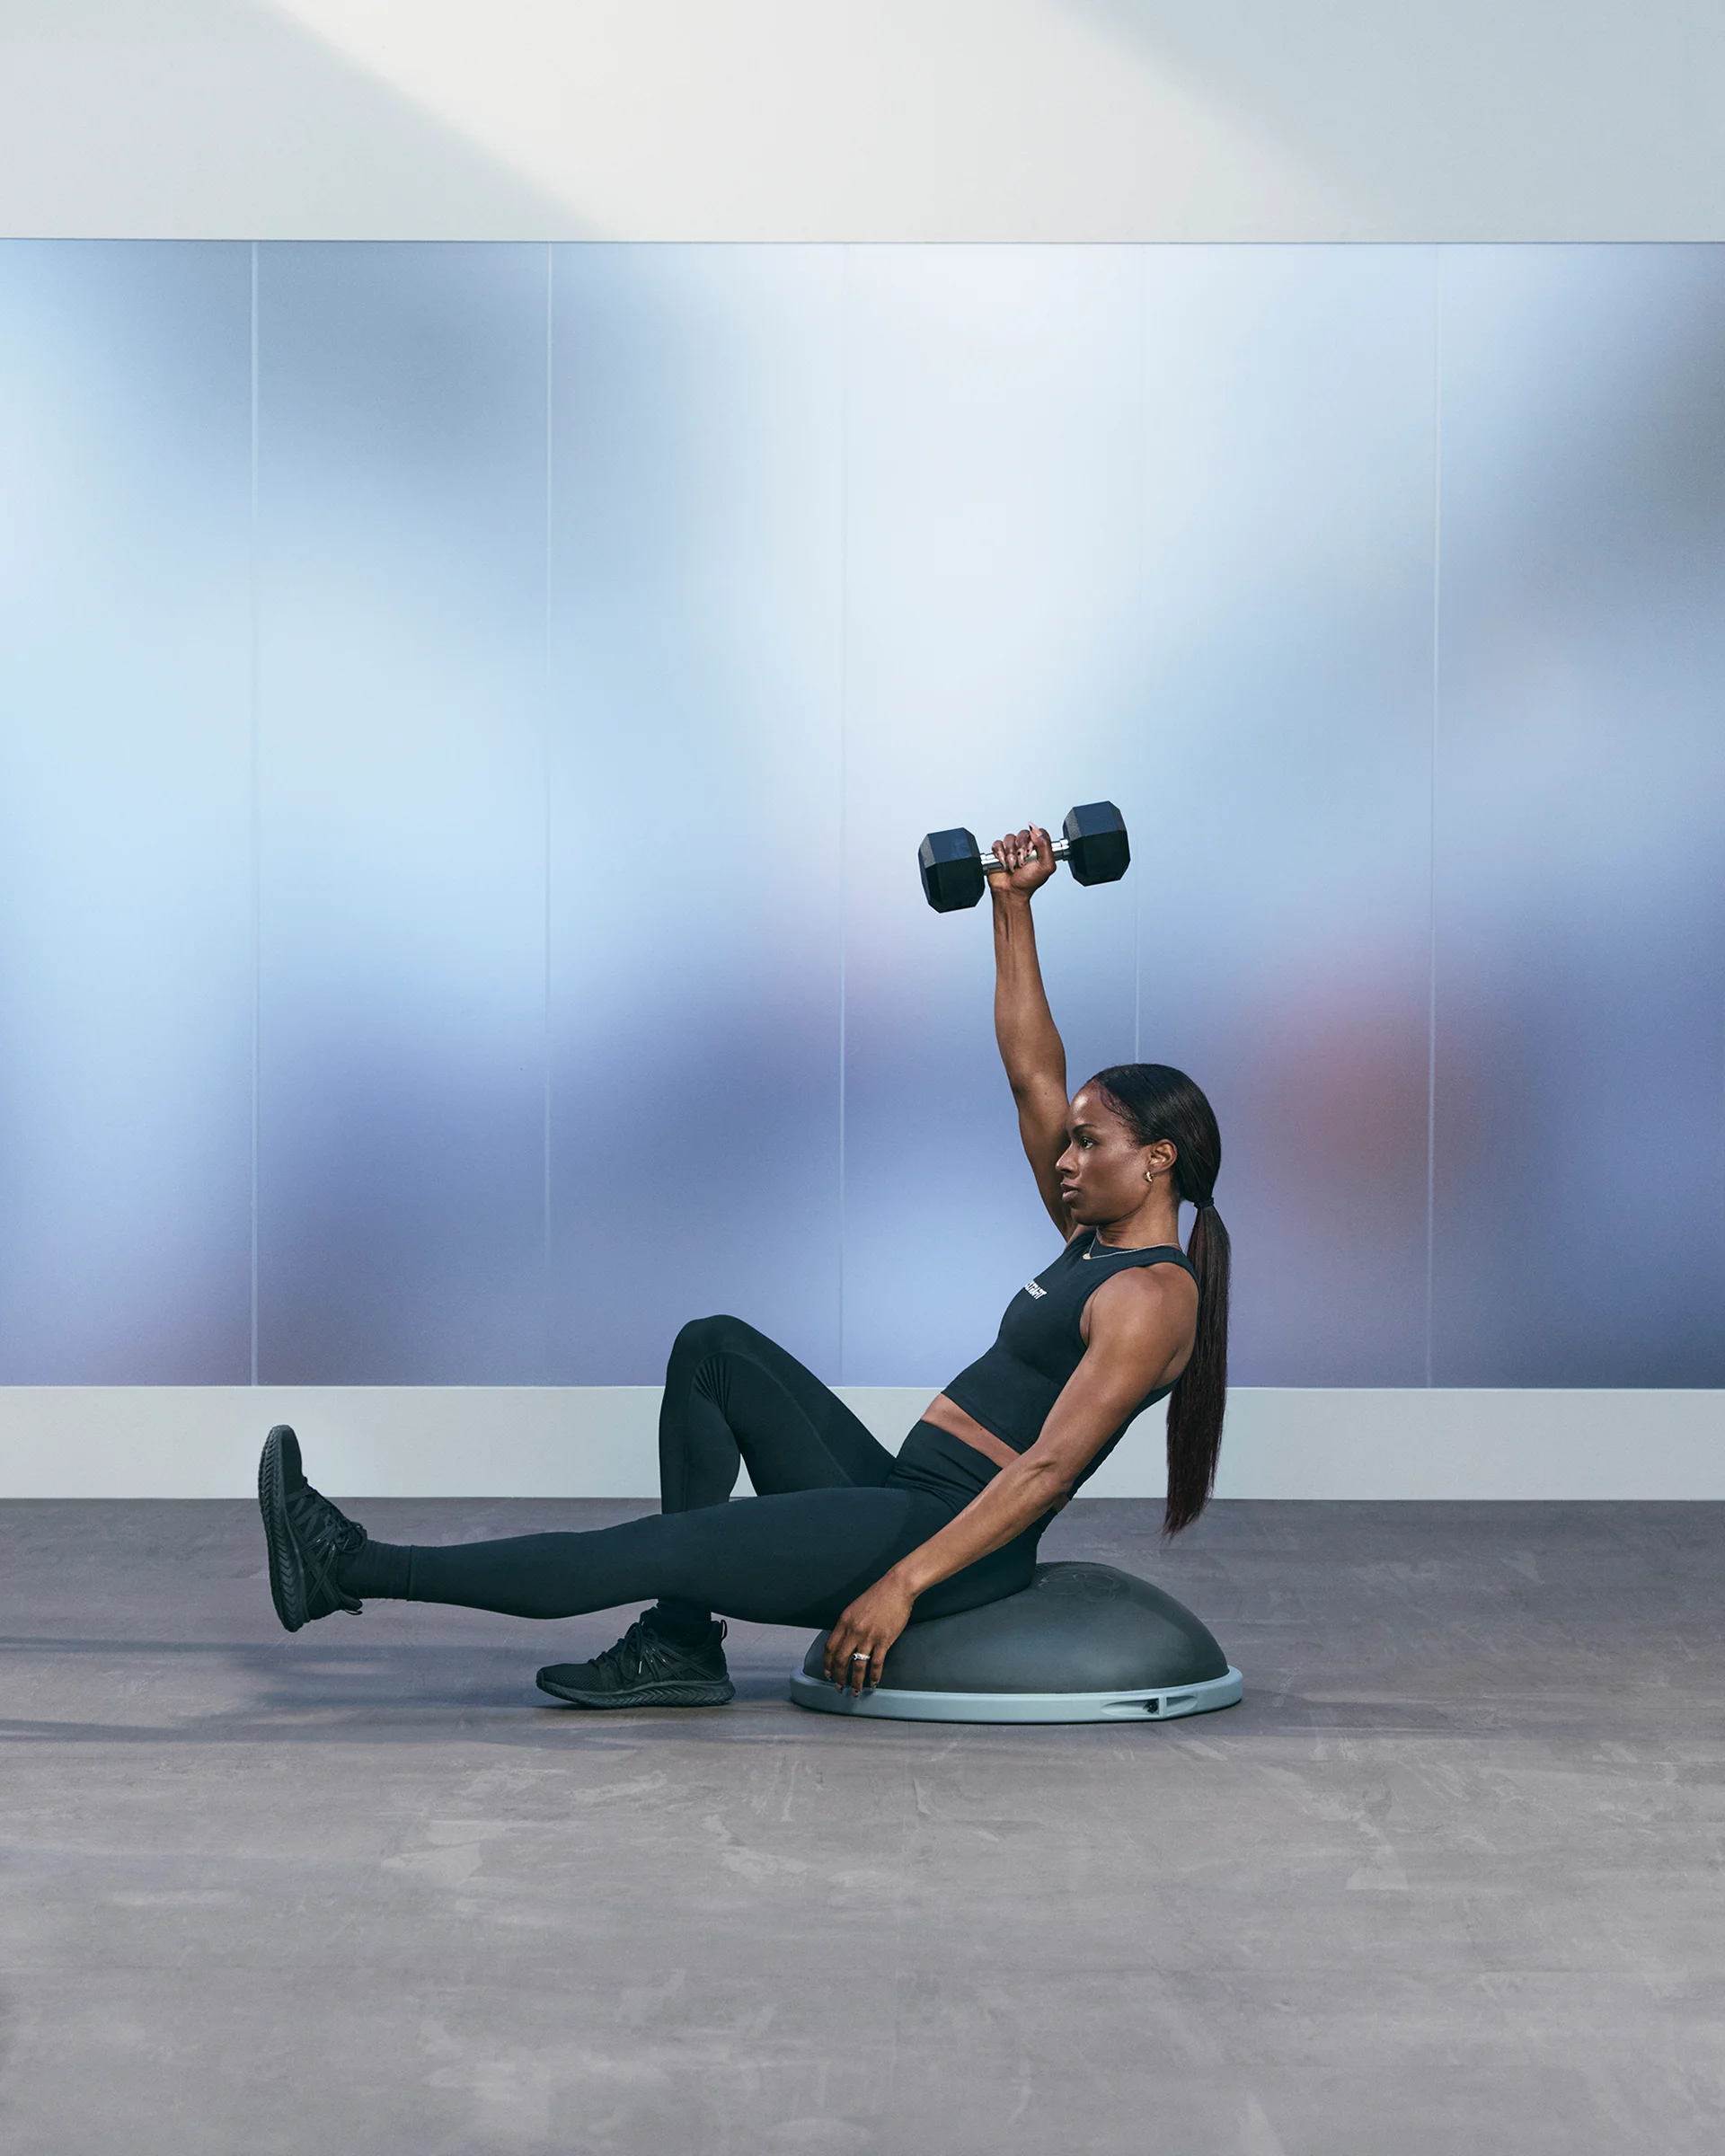 A Life Time member sitting on a BOSU with one leg stretched out and one arm up holding a dumbbell.